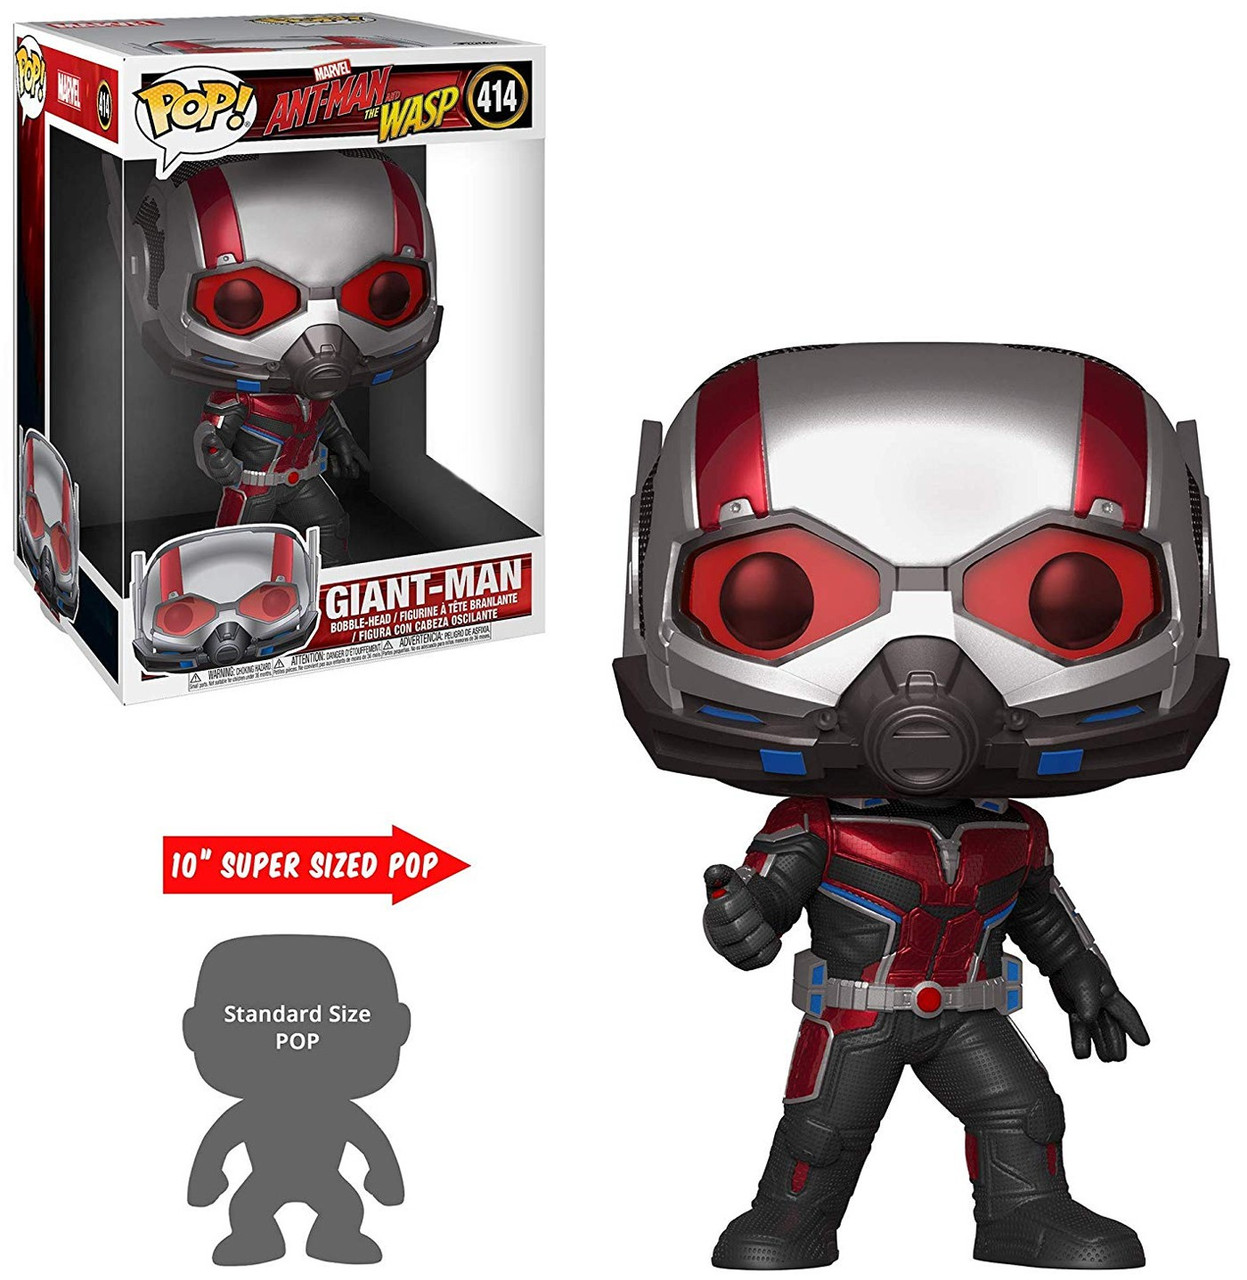 Funko Marvel Ant Man And The Wasp Pop Marvel Giant Man Exclusive Vinyl Figure 414 Super Sized Toywiz - im ant man roblox